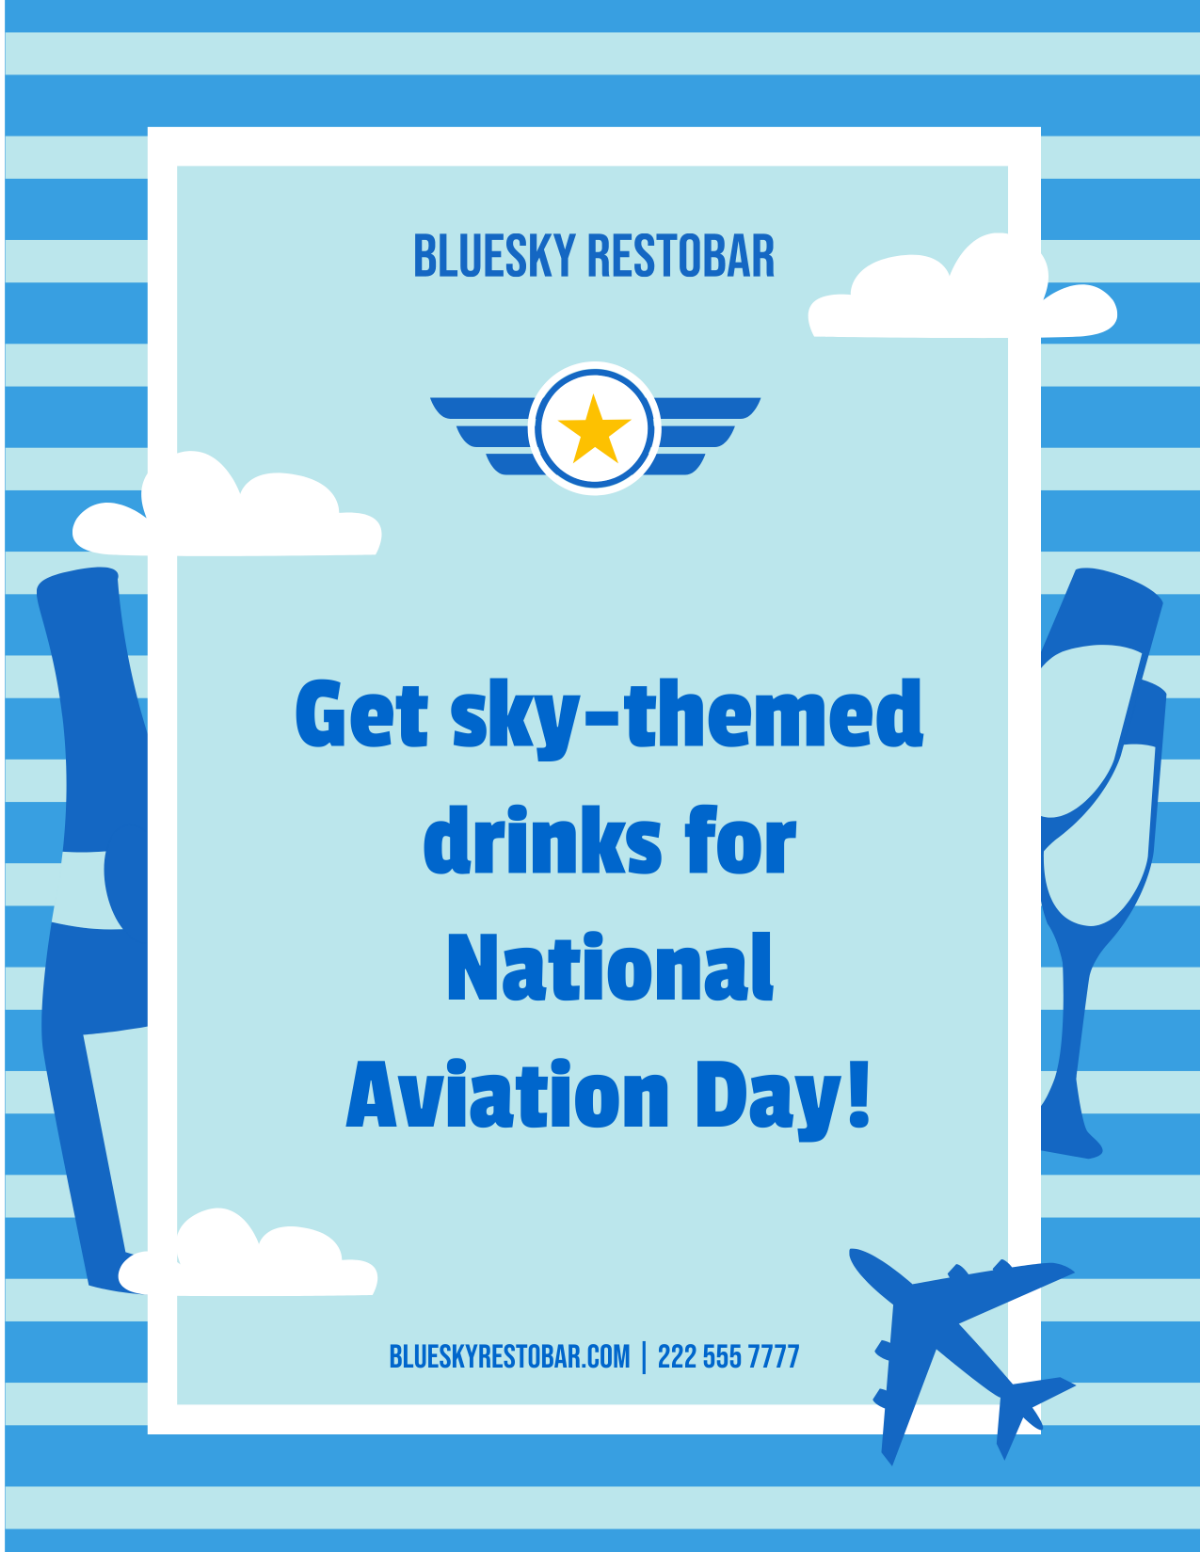 National Aviation Day Sales Promotion Template